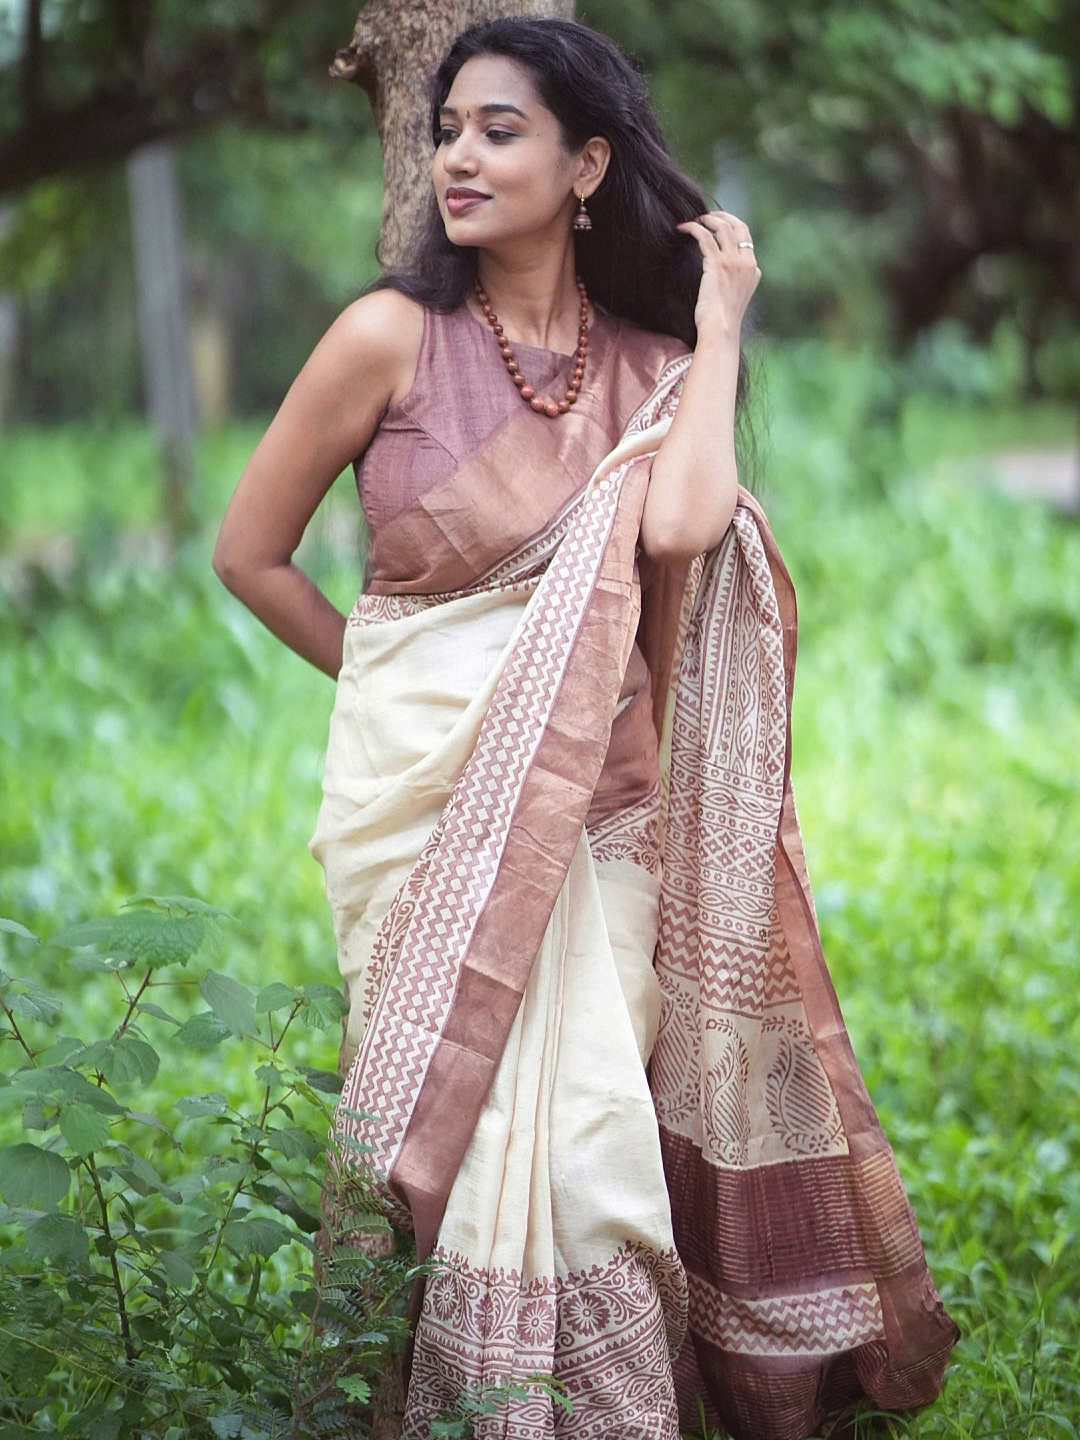 Beyond Elegance: A Guide to Tussar Silk Blouses and Contemporary Trends